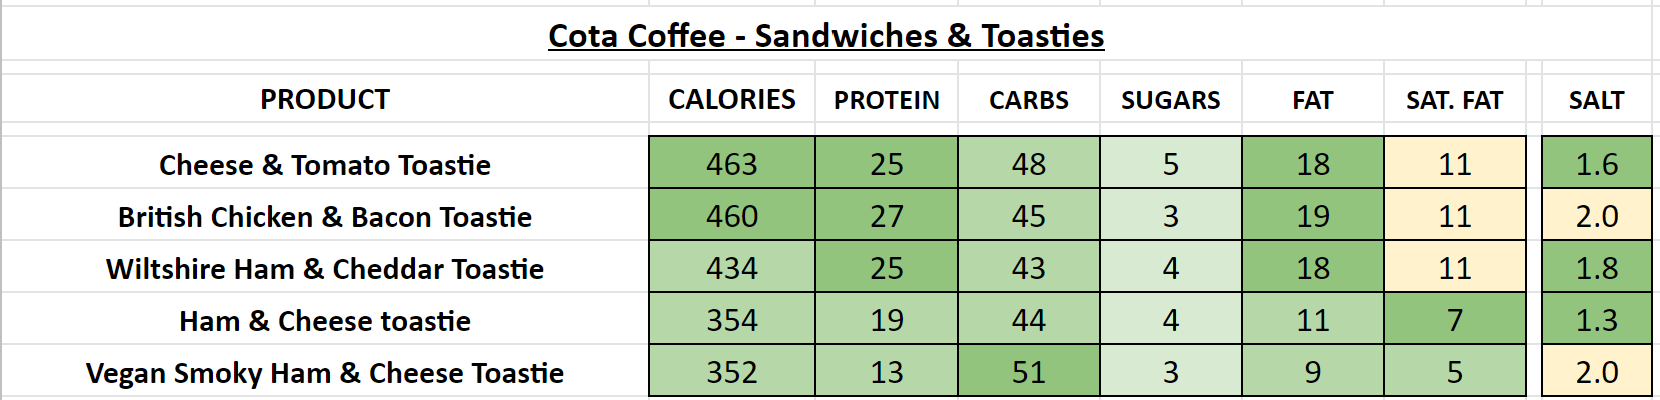 costa coffee nutritional information calories sandwiches toasties